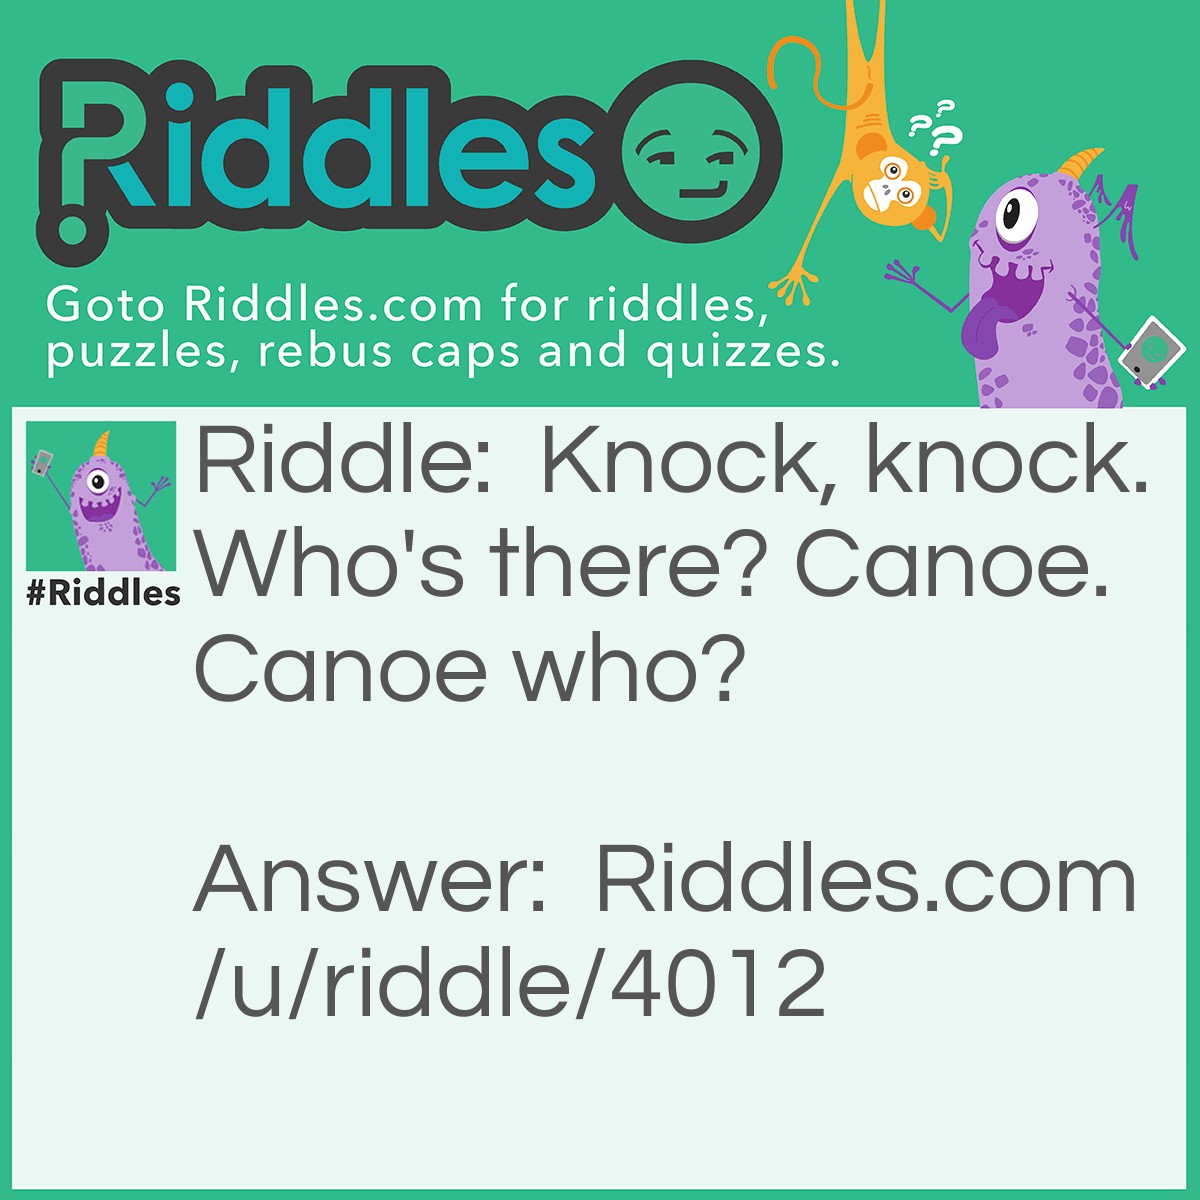 Riddle: Knock, knock. Who's there? Canoe. Canoe who? Answer: Canoe help me with my homework?